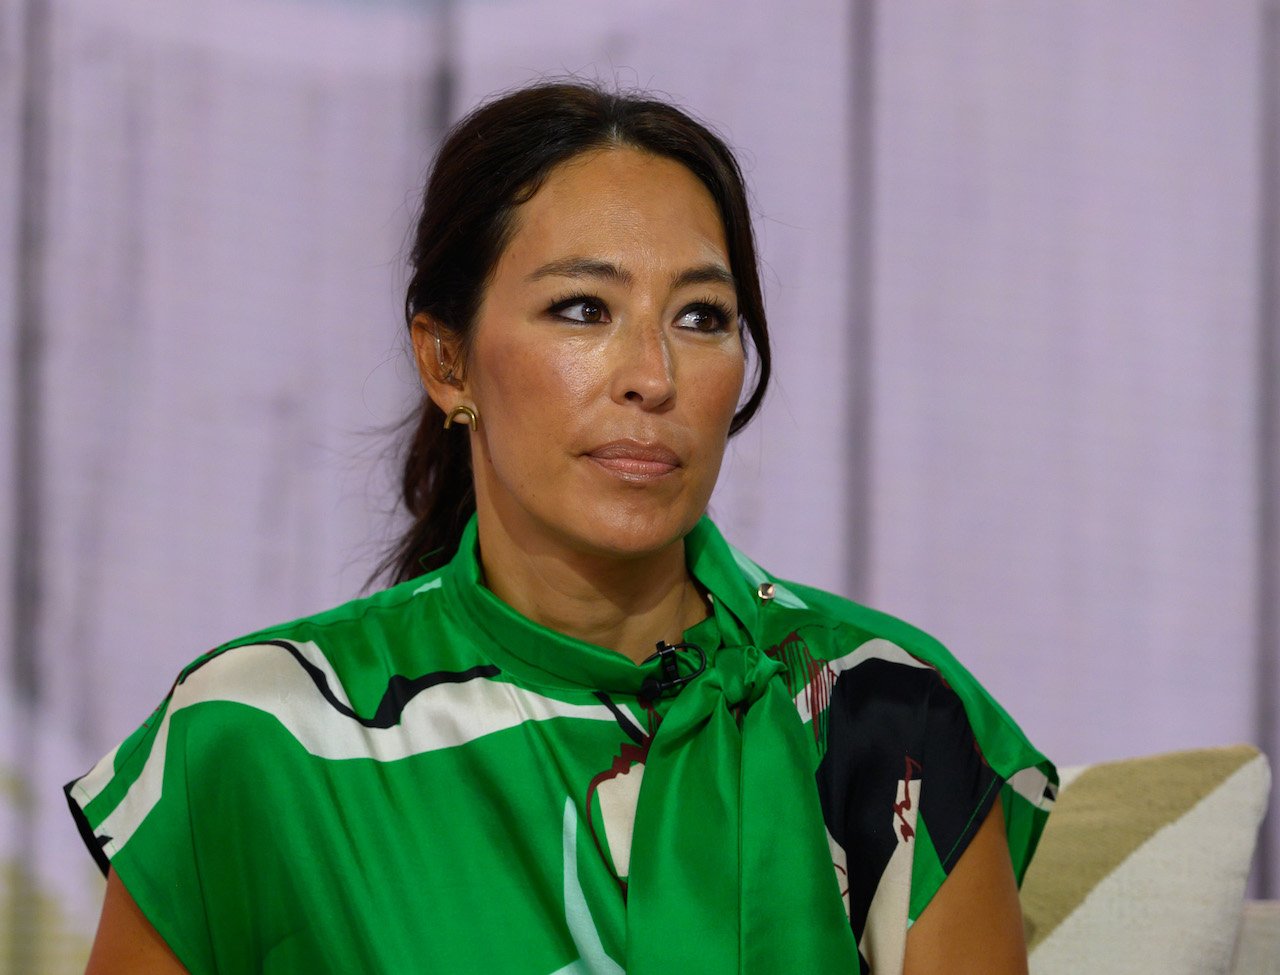 Joanna Gaines, pictured on 'Today' in 2021, said some false accusations keep her up.